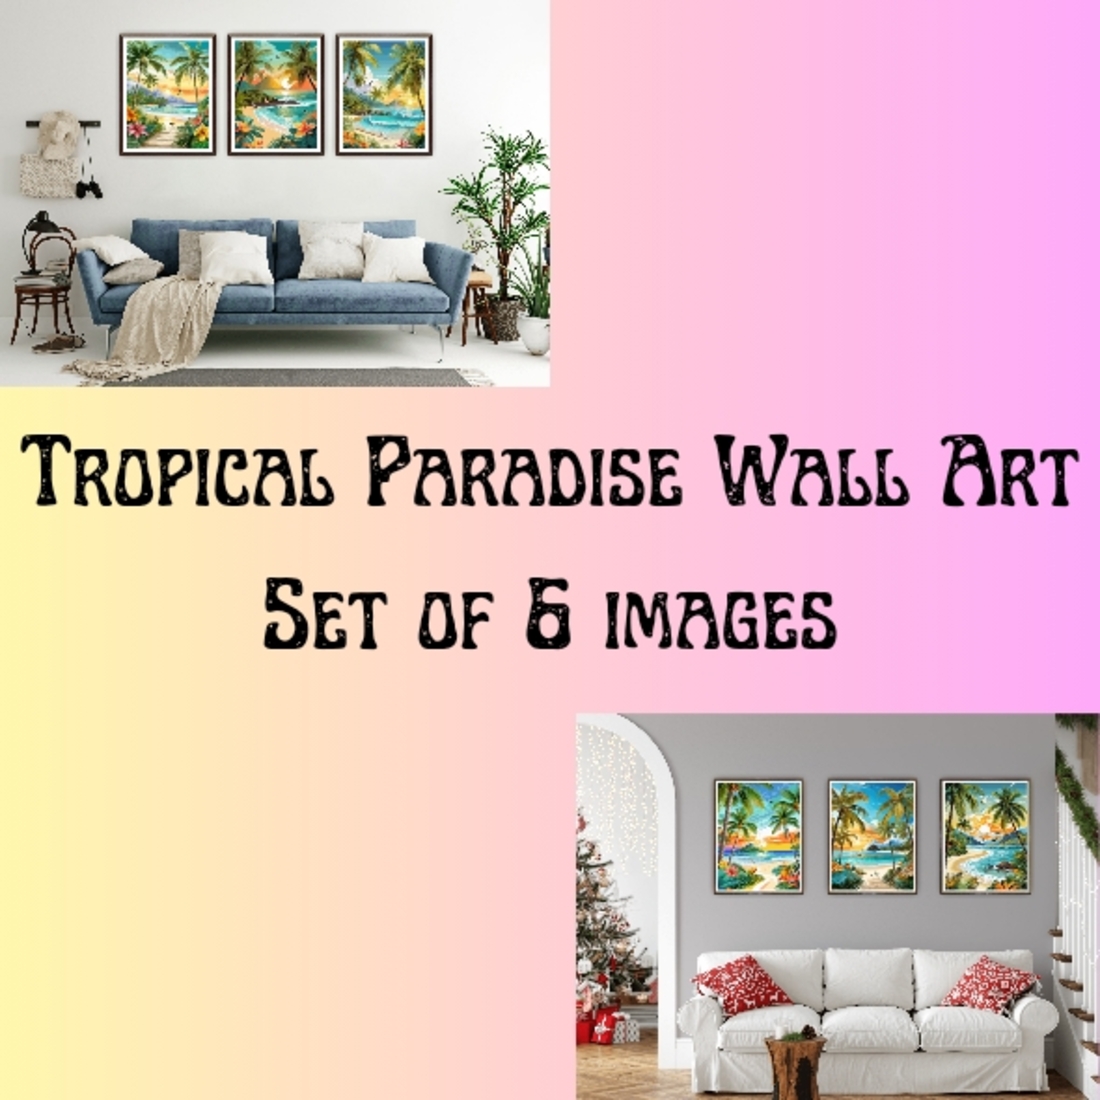 Tropical Bliss: Explore Paradise with Exquisite Wall Art (Set of 6 images) cover image.